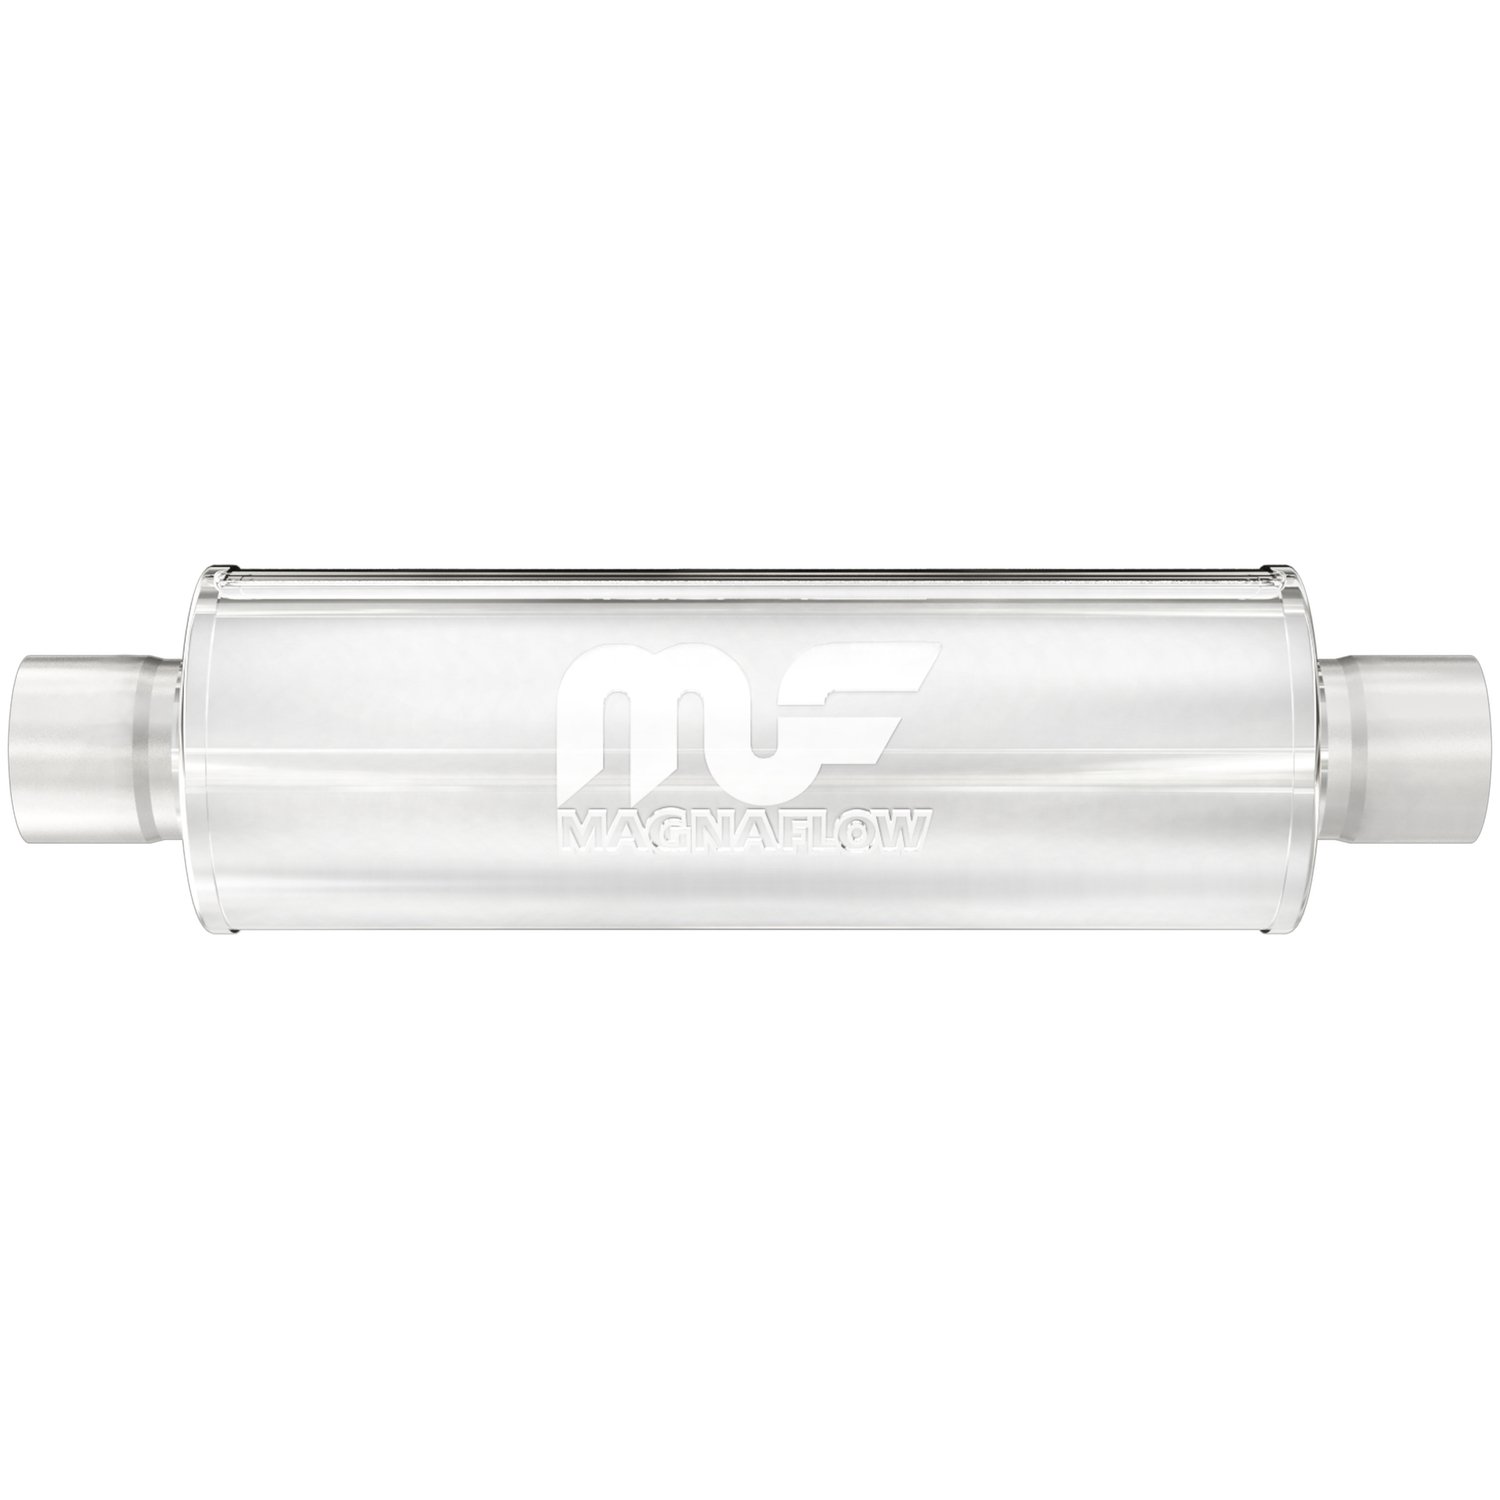 6" Round Muffler Center In/Center Out: 2.5" Body Length: 18" Overall Length: 24" Core Size: 2.5" Satin Finish